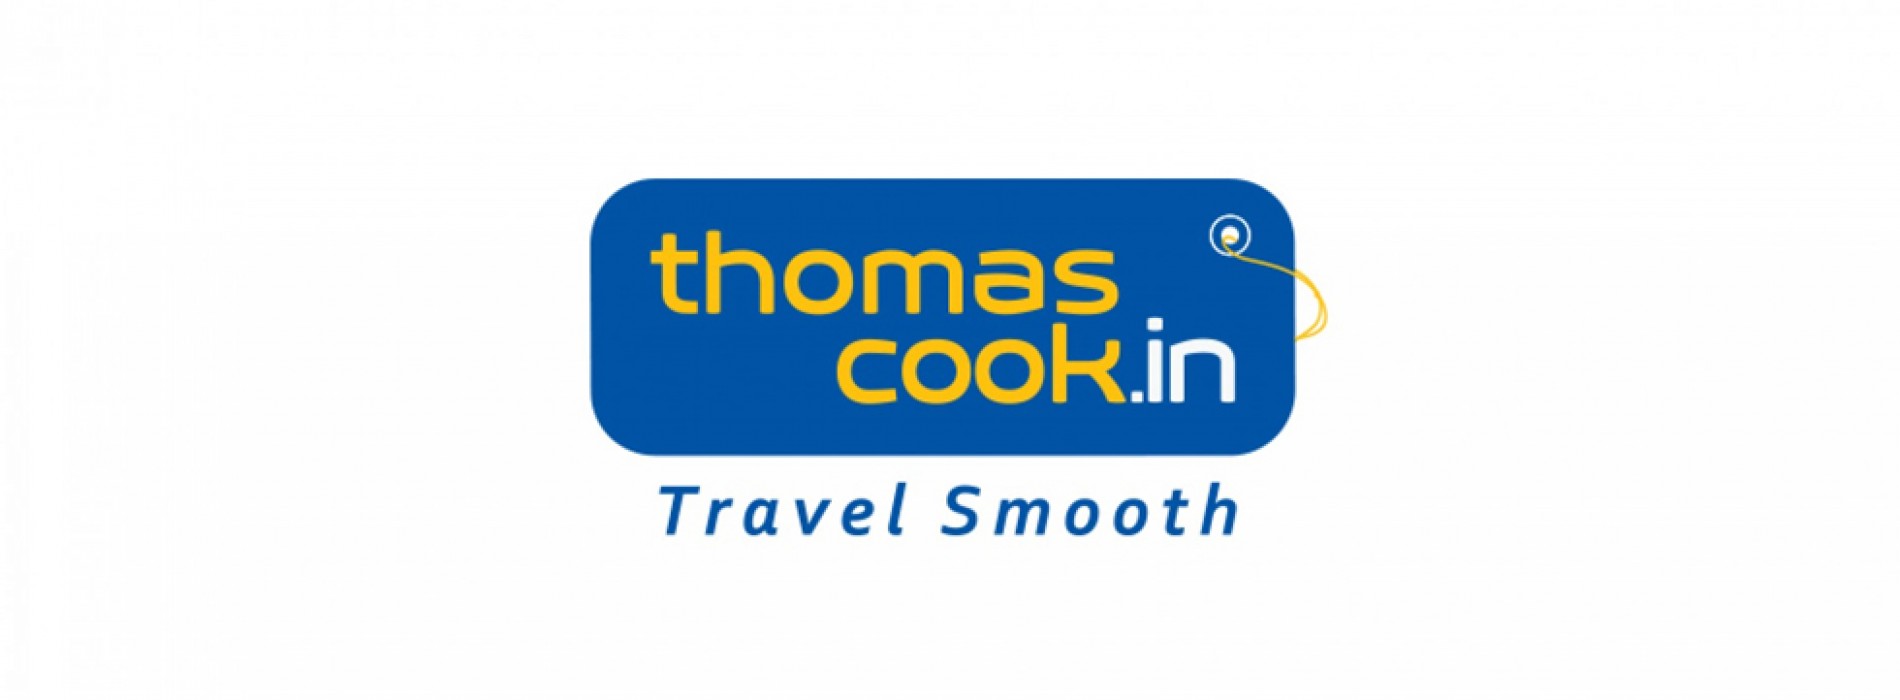 Thomas Cook India targets long weekend getaways, launches unique packages for Domestic and International travel